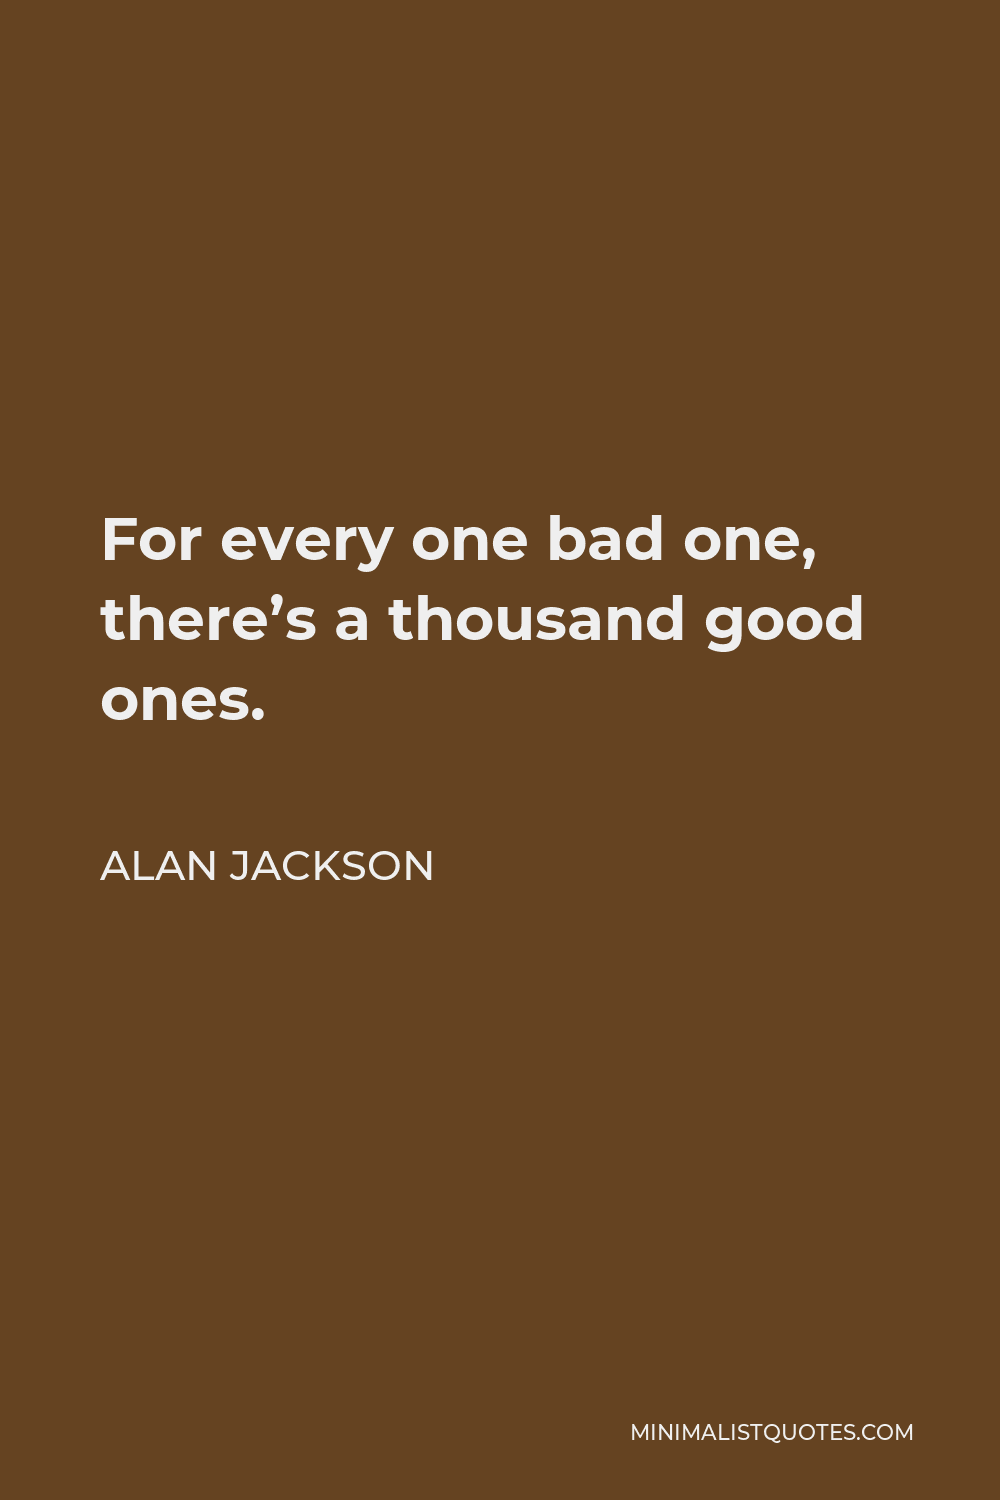 Alan Jackson Quote - For every one bad one, there’s a thousand good ones.